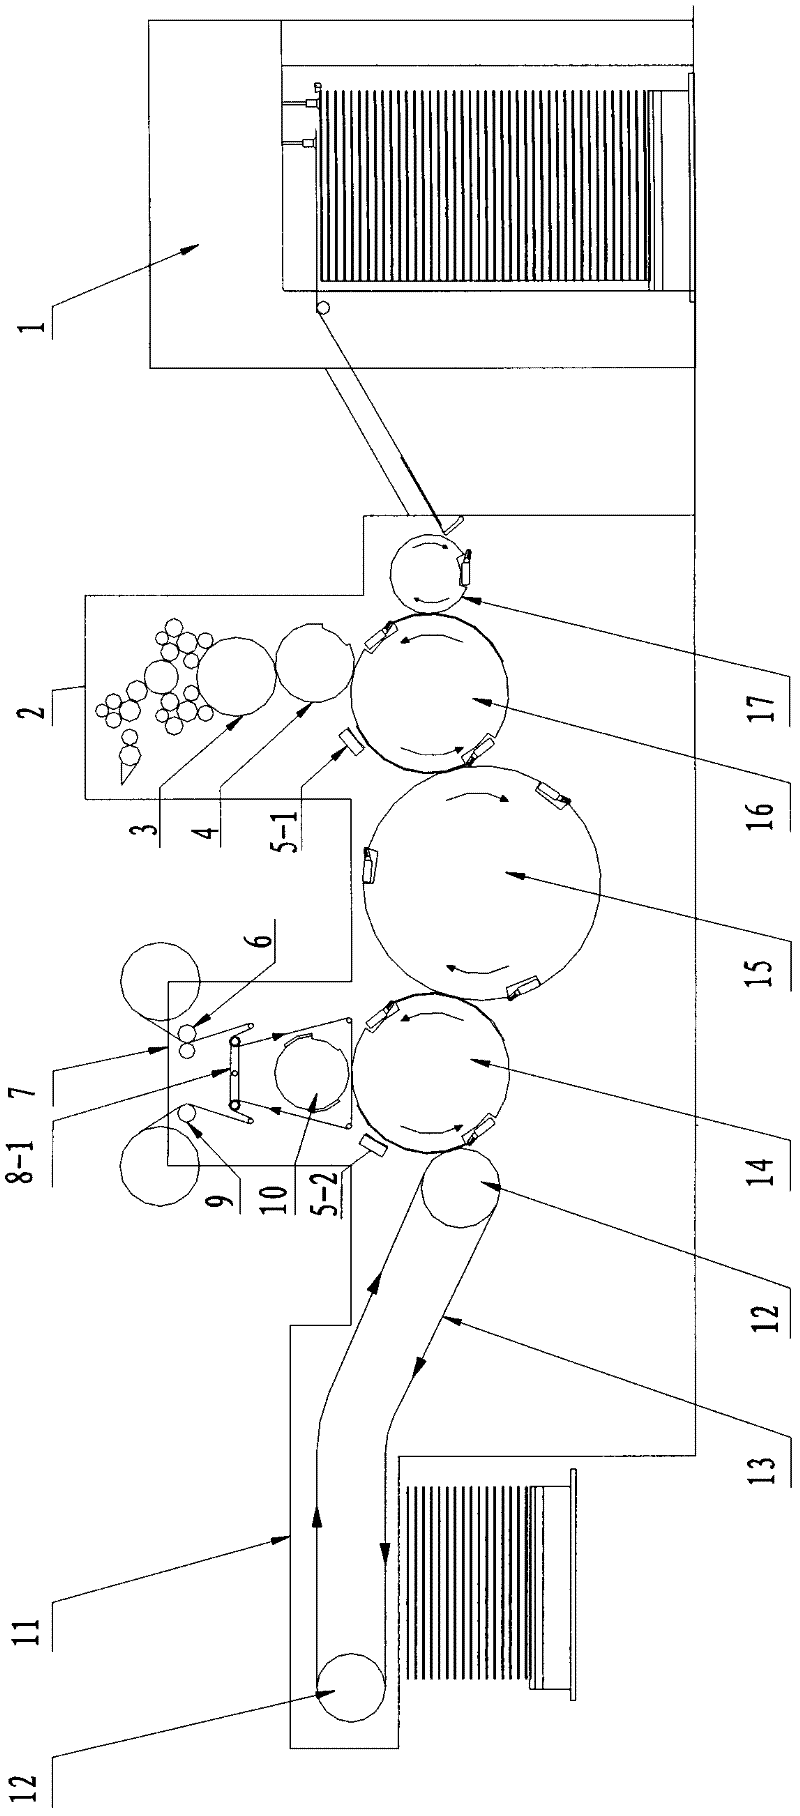 Single paper cold waving printing equipment and operation method thereof